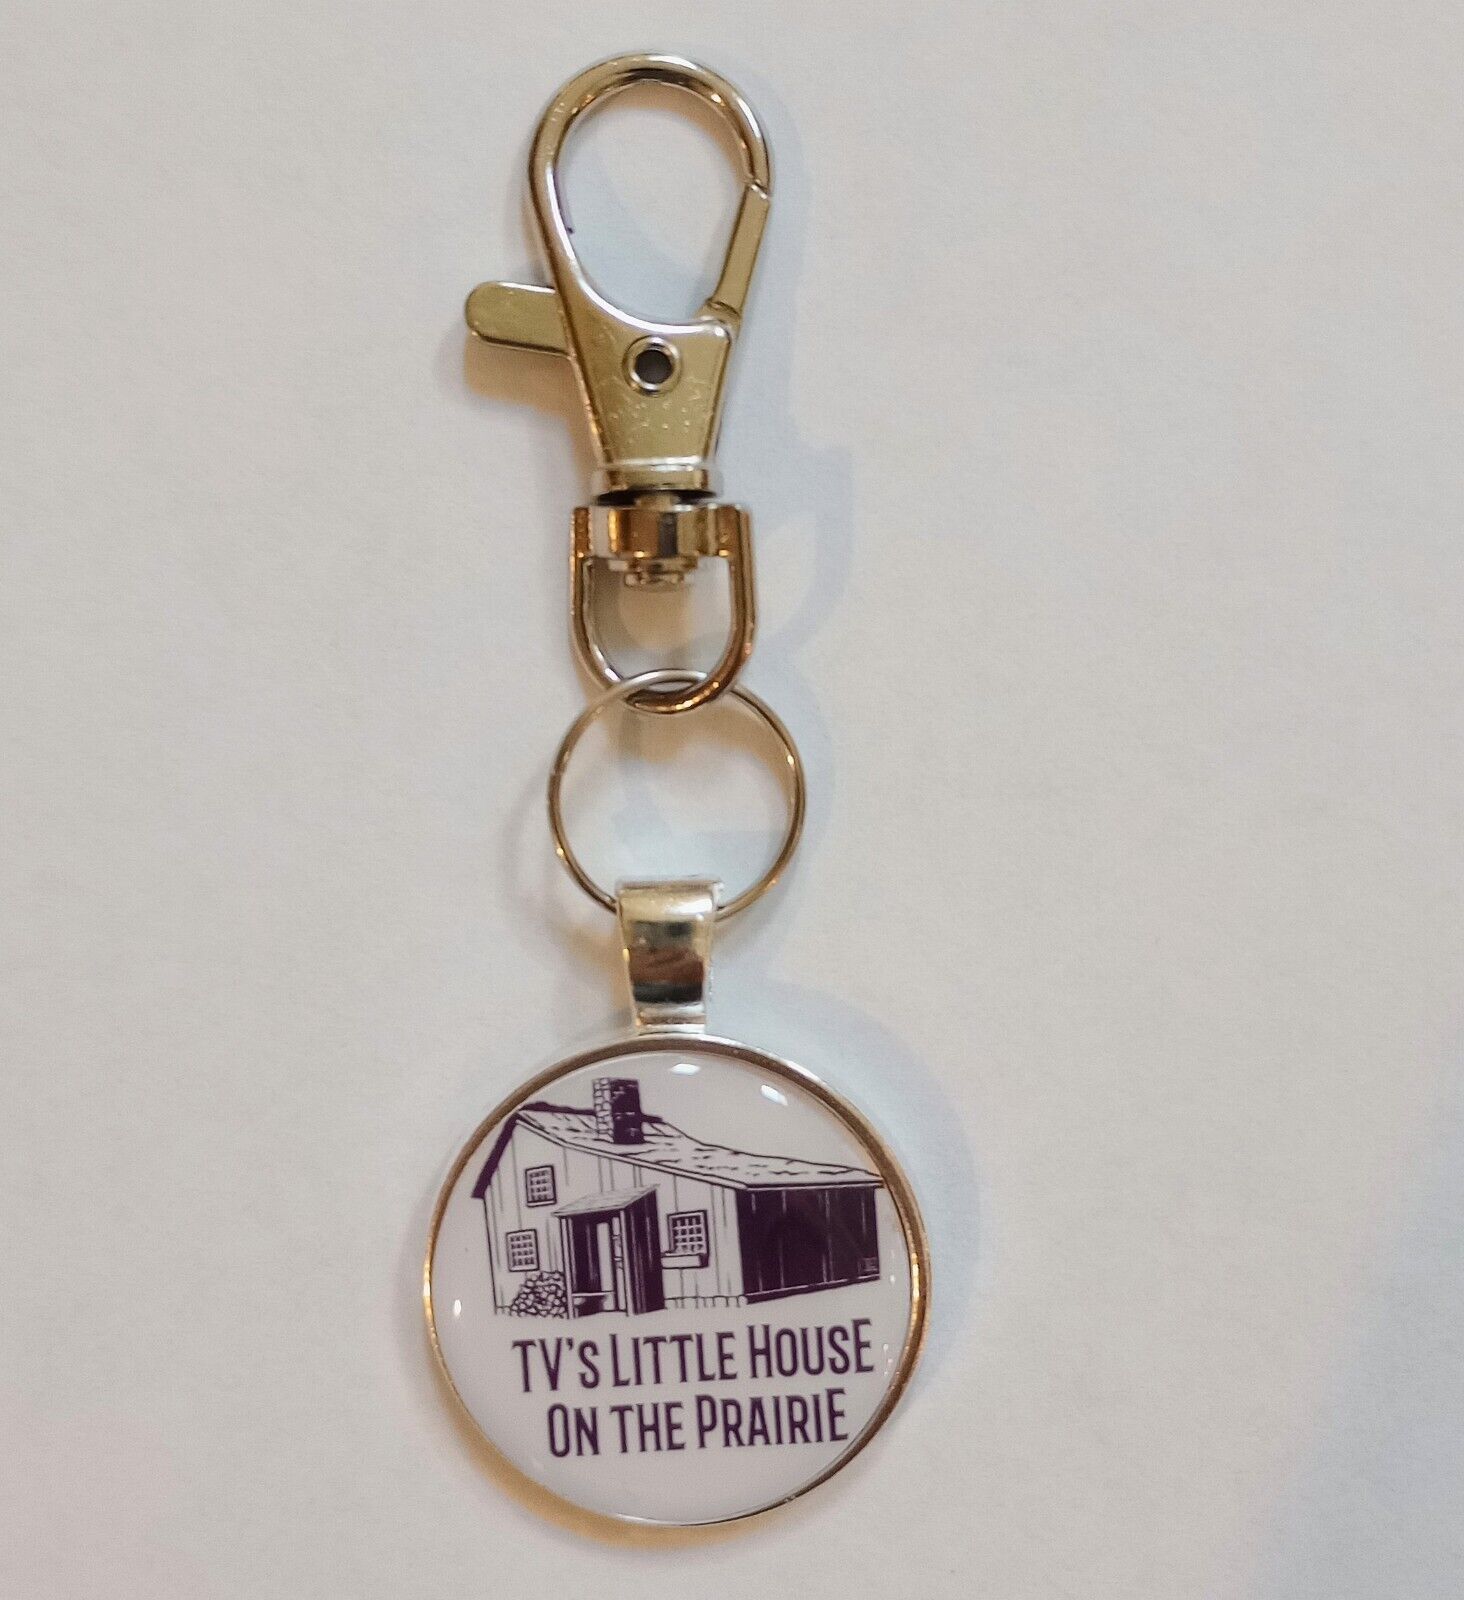 Little House On The Prairie Keychain (Michael Landon As Charles Ingalls)😊